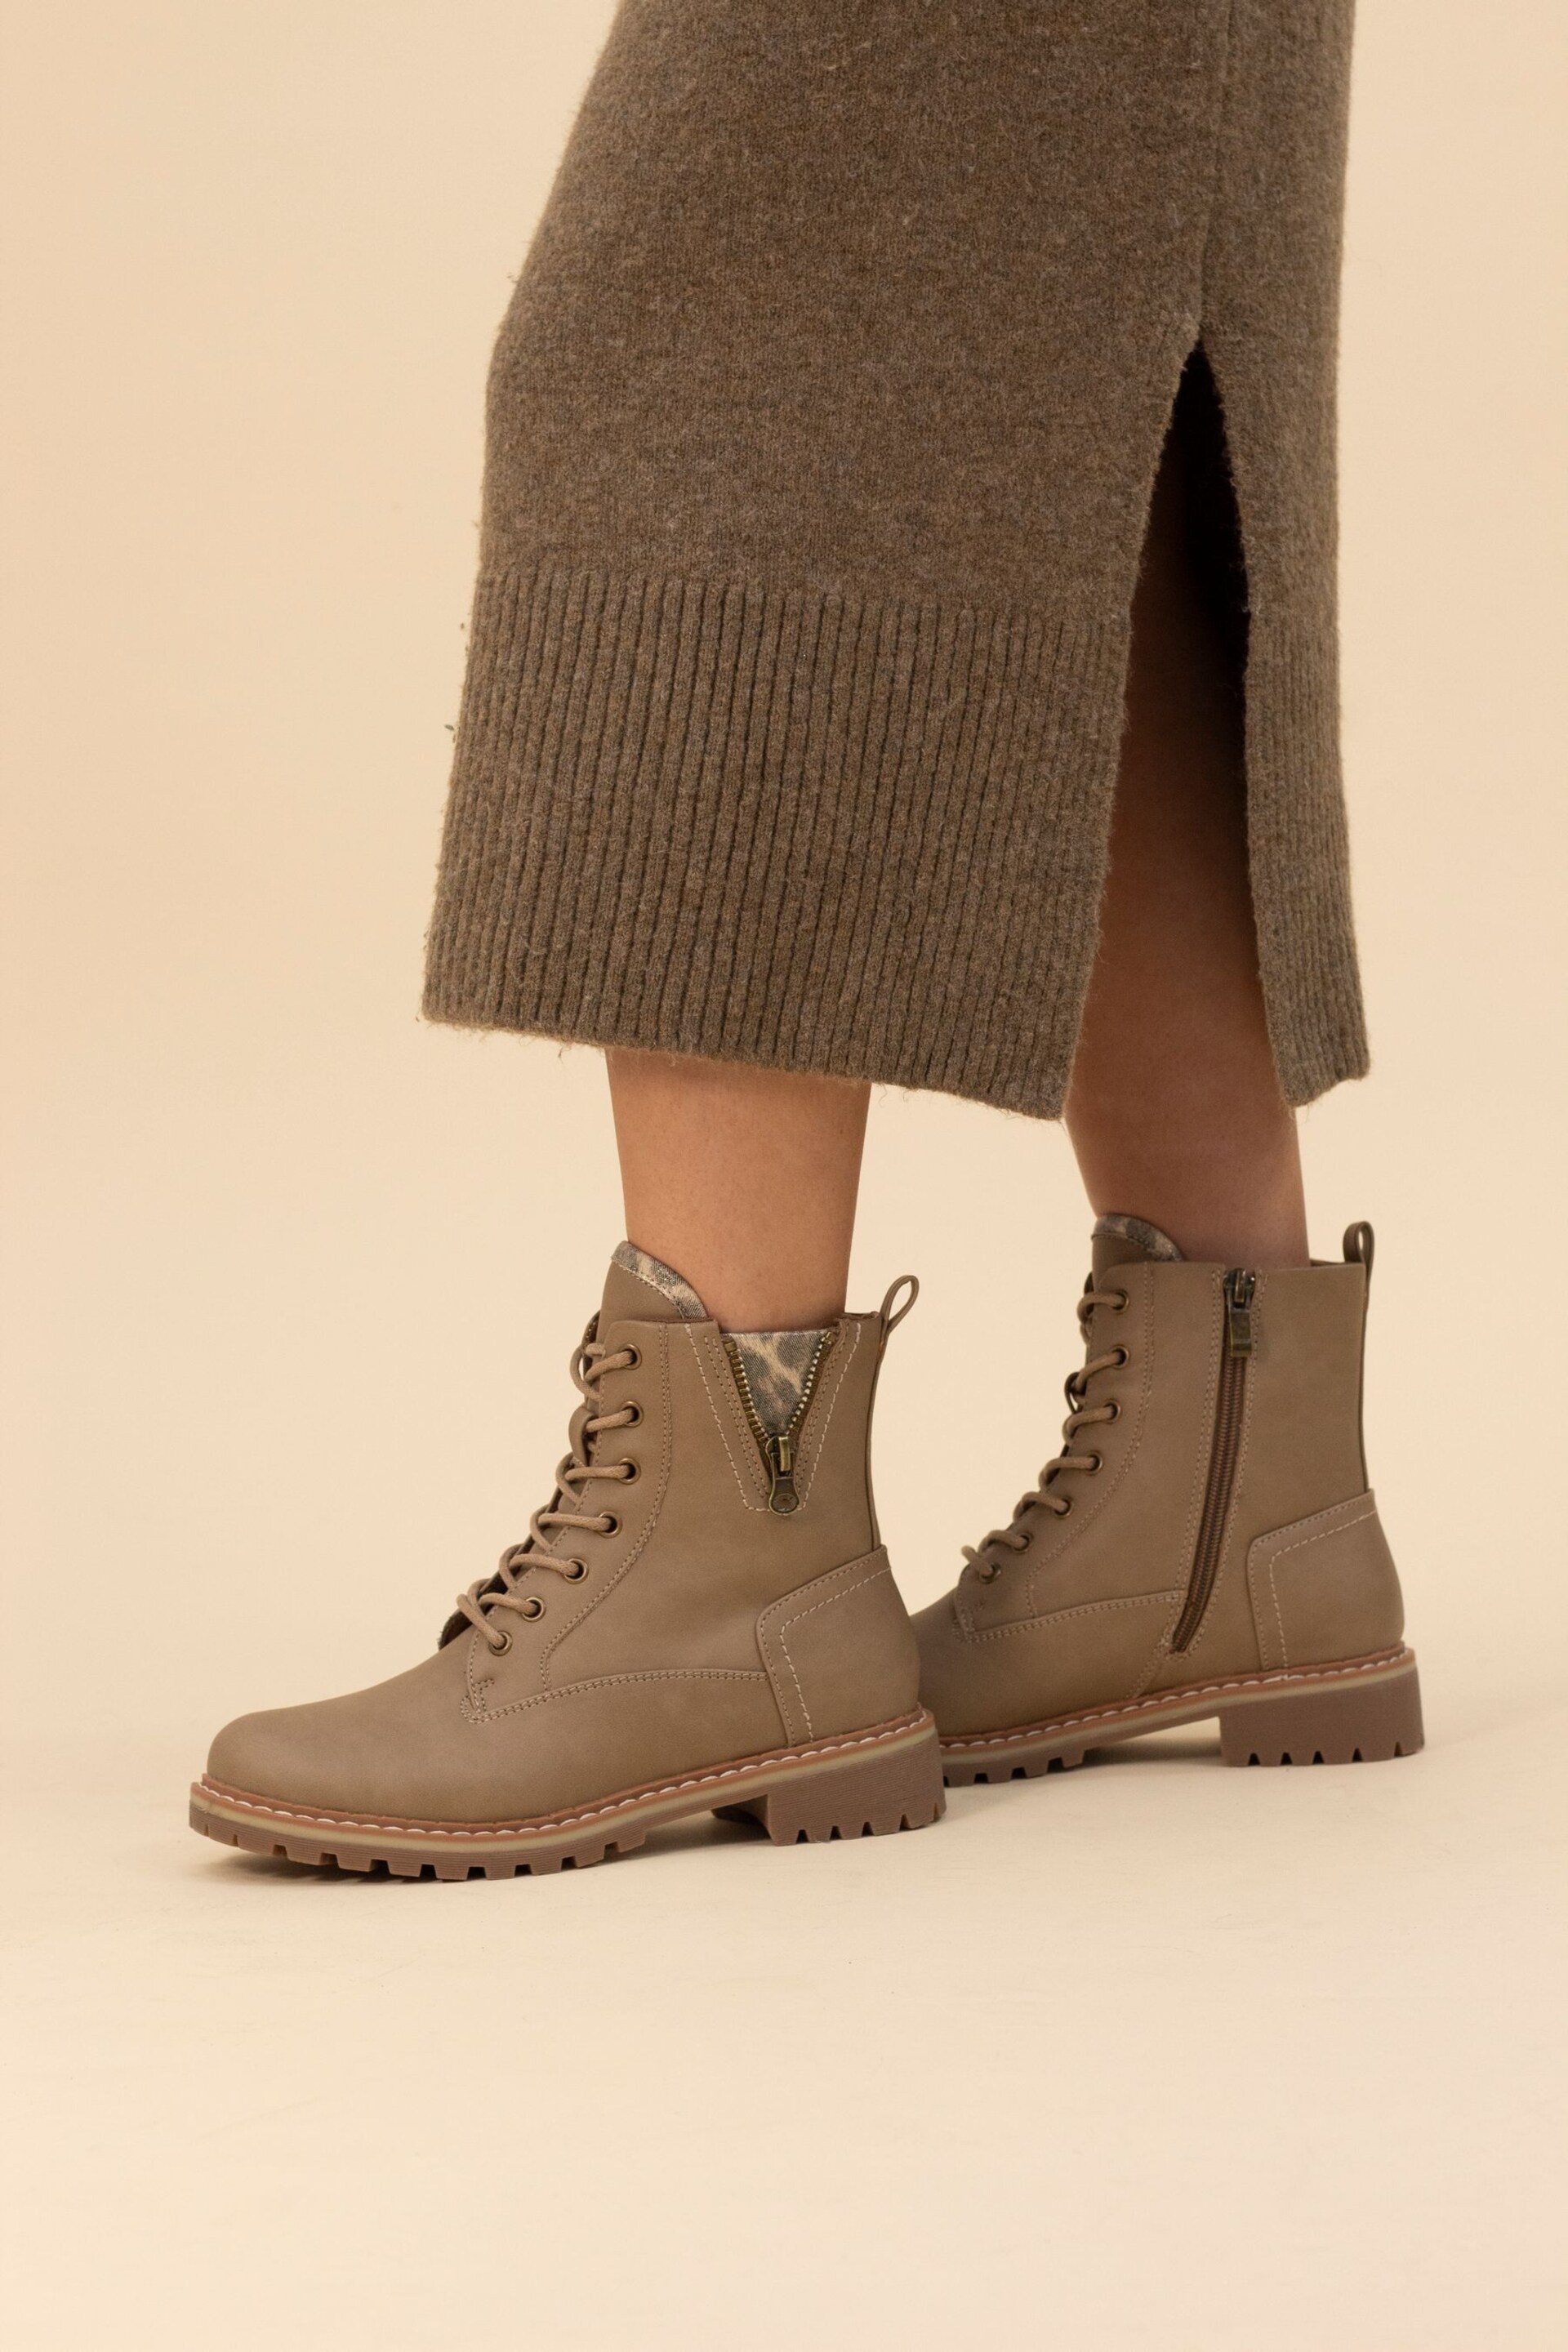 Lunar Natural Nevada Stone Laceup Ankle Boots - Image 9 of 9